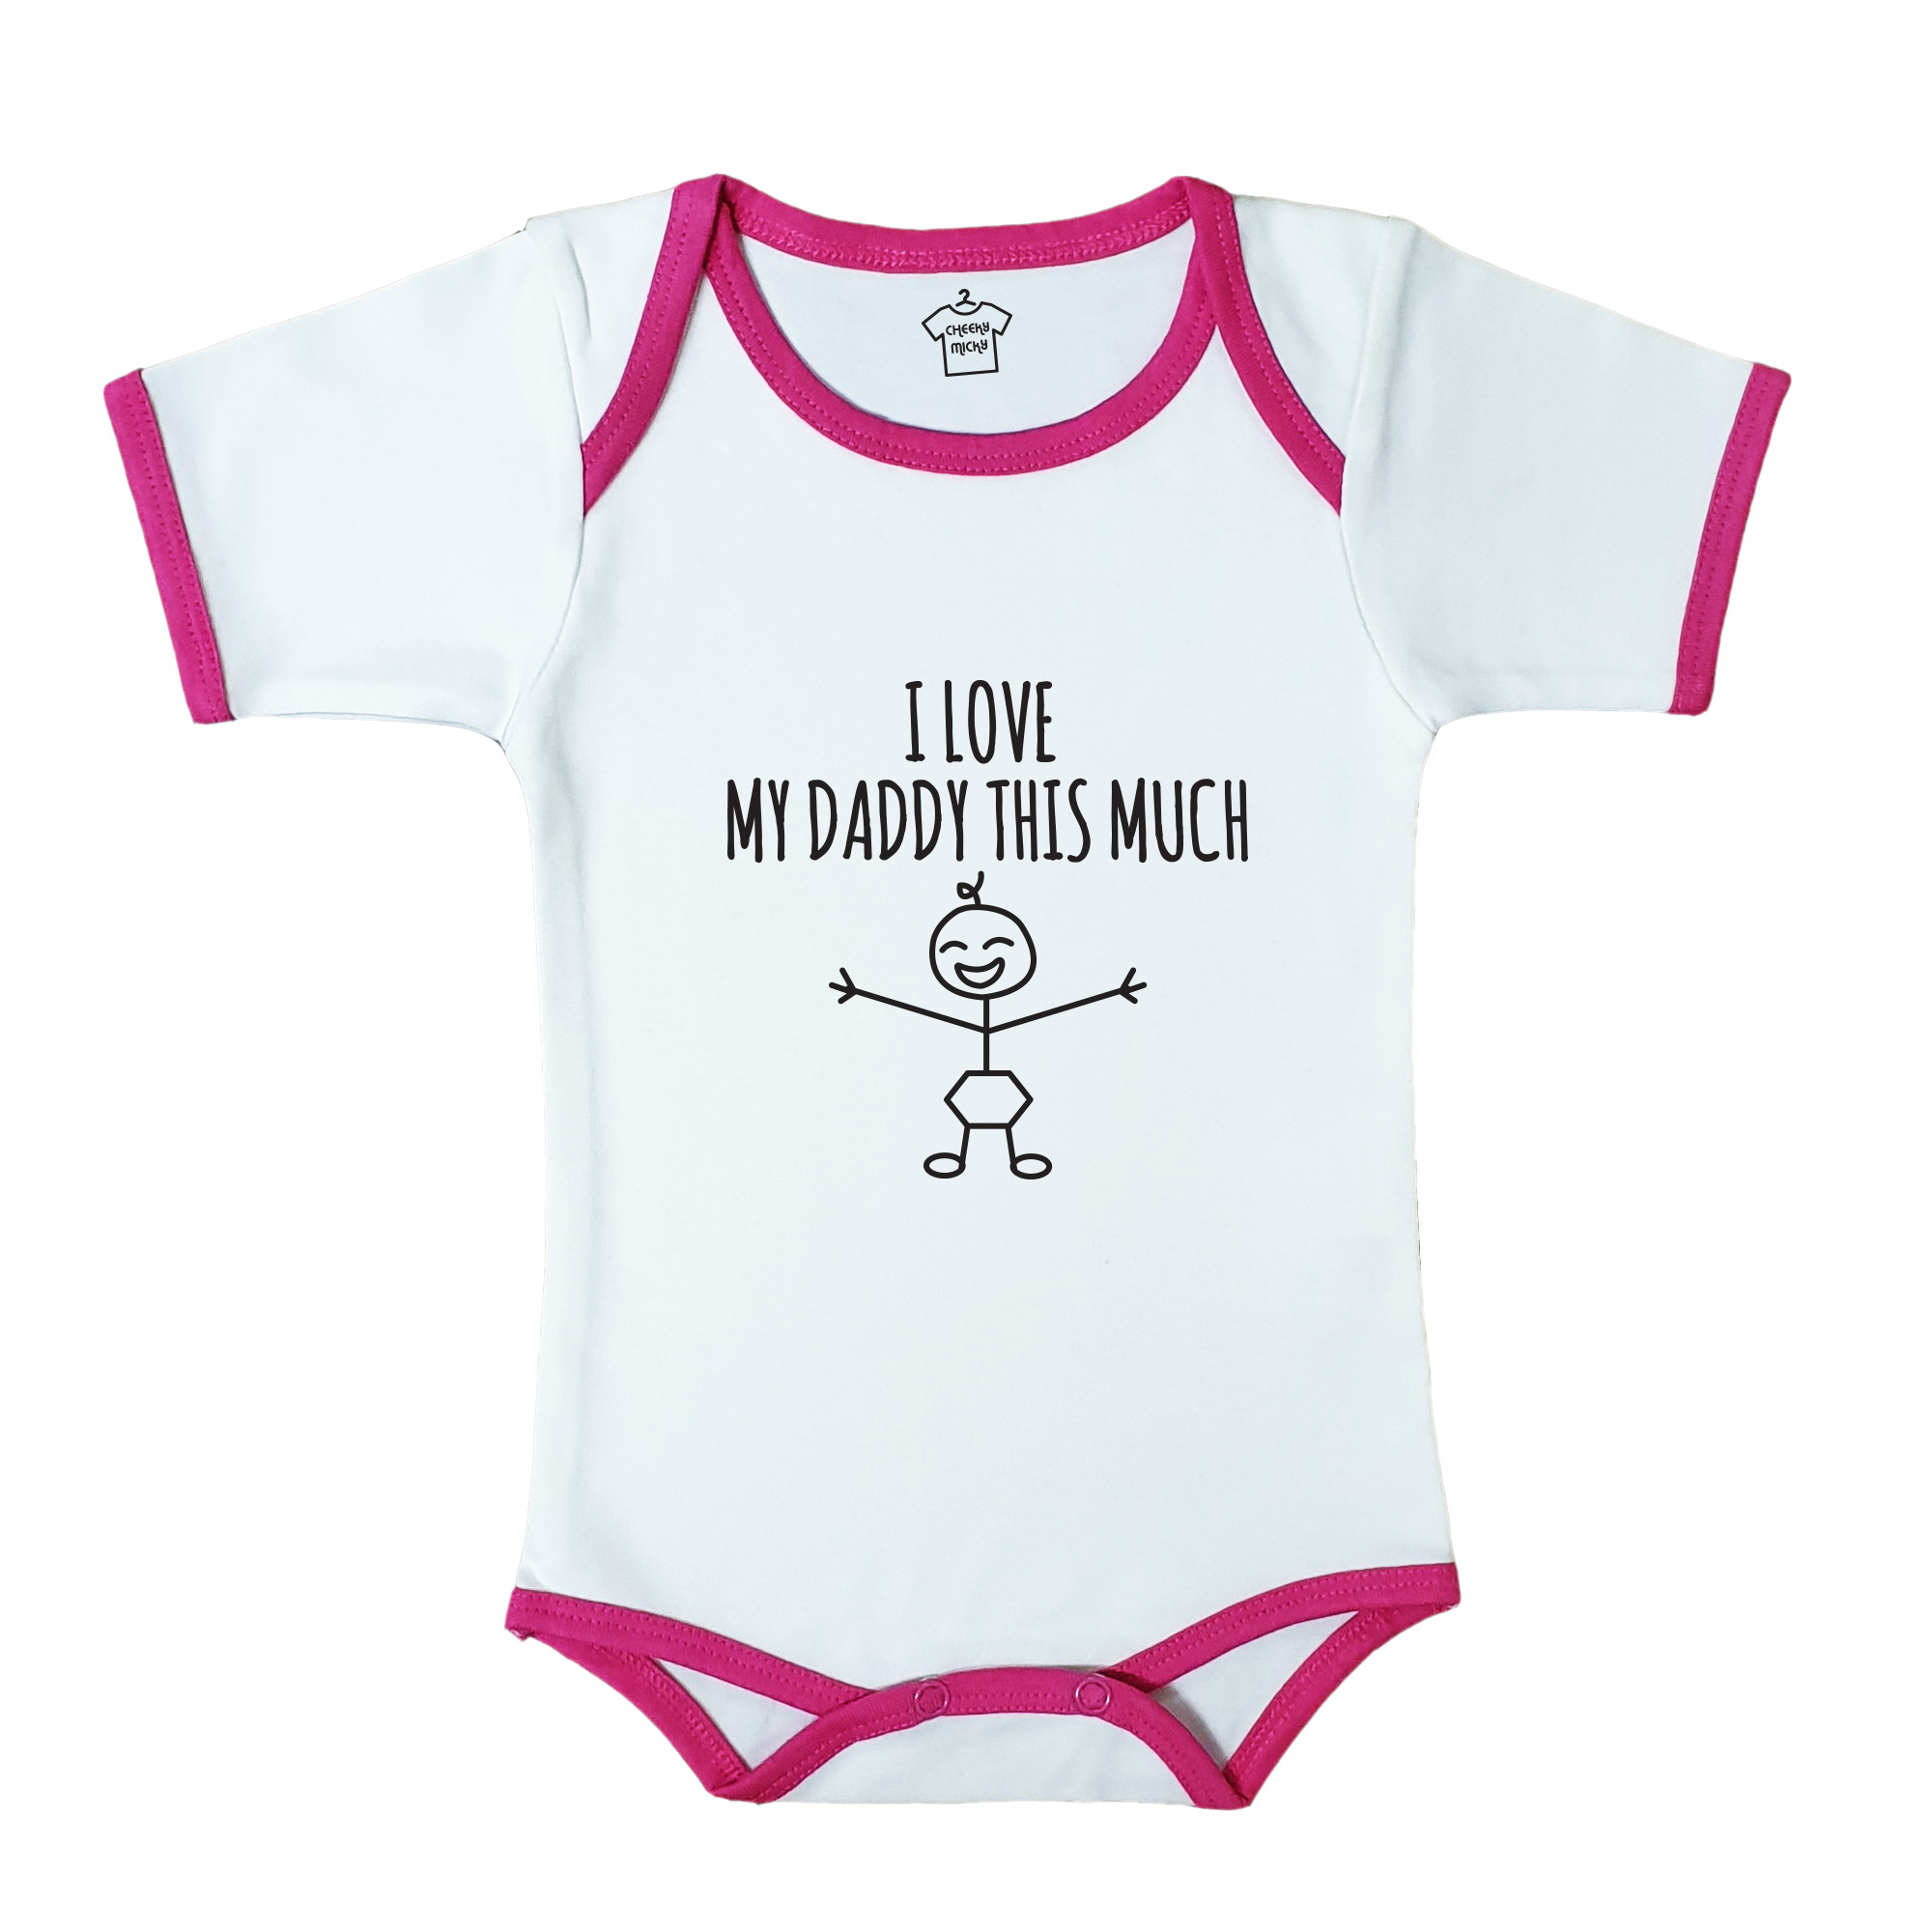 Soft baby body suit with pink trim, 100% cotton, machine washable. Age 6-12months. Print: I Heart My Daddy This Much.